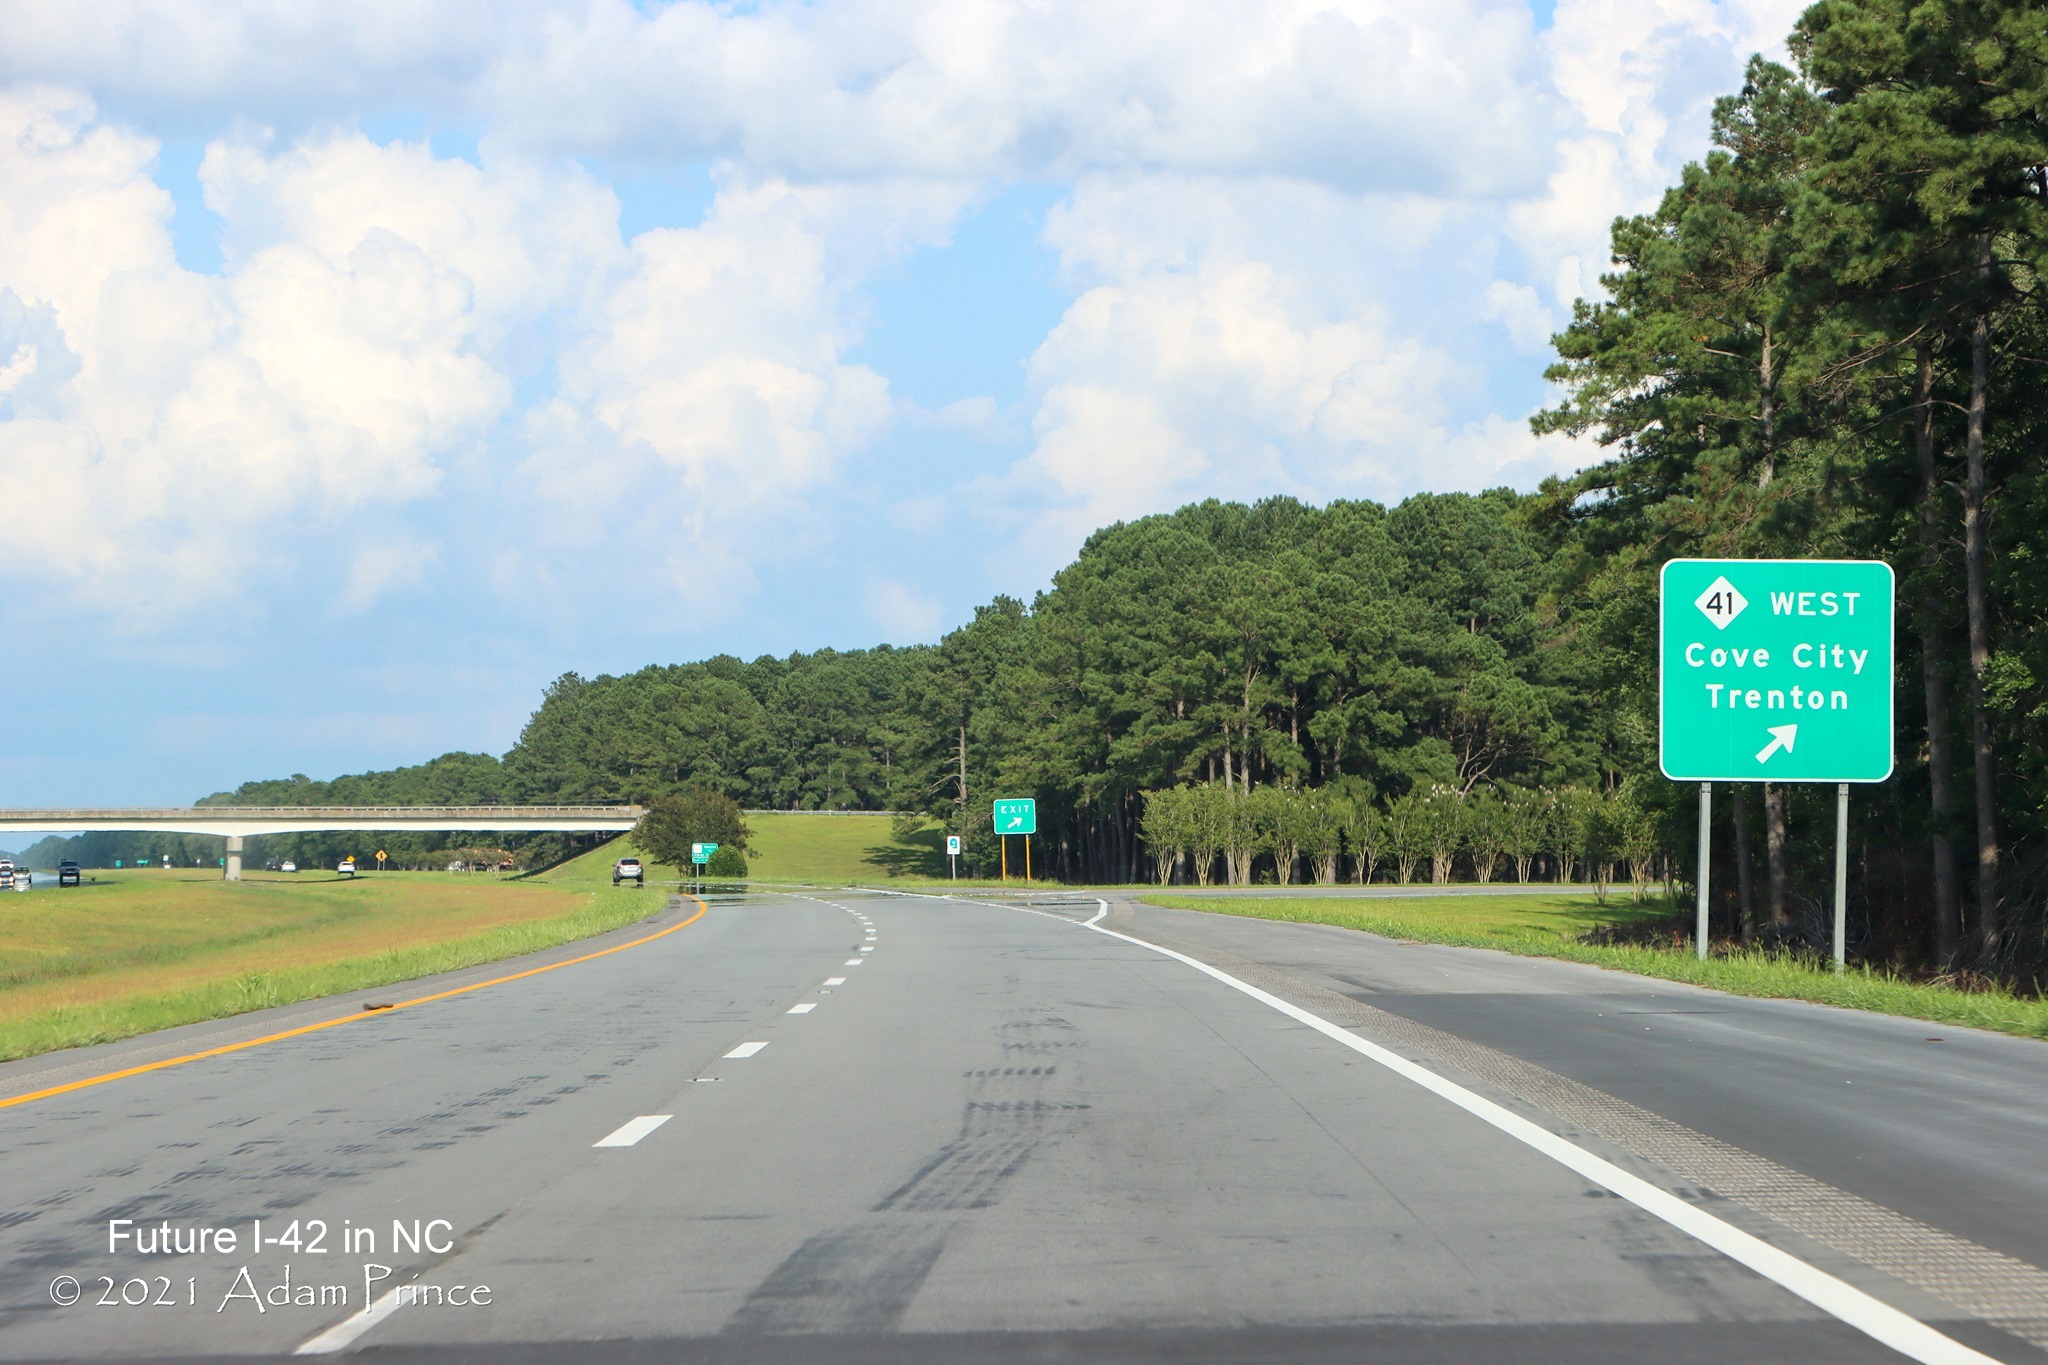 Image of ramp sign along newly widened right shoulder of US 70 in Craven County, photo by Adam Prince, July 2021